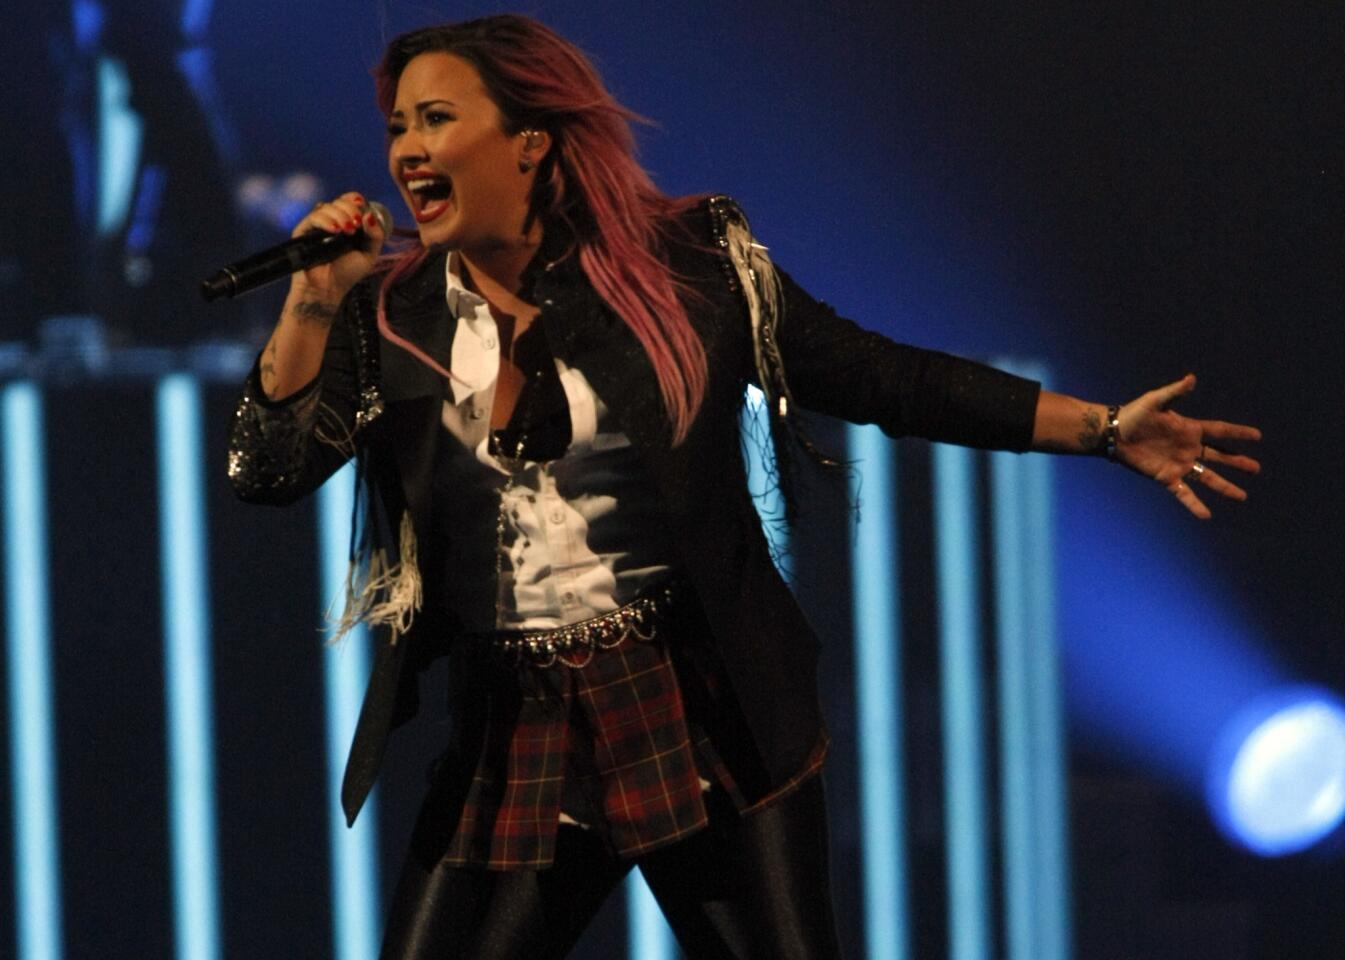 Demi Lovato performs for a soldout crowd at Honda Center in Anaheim.